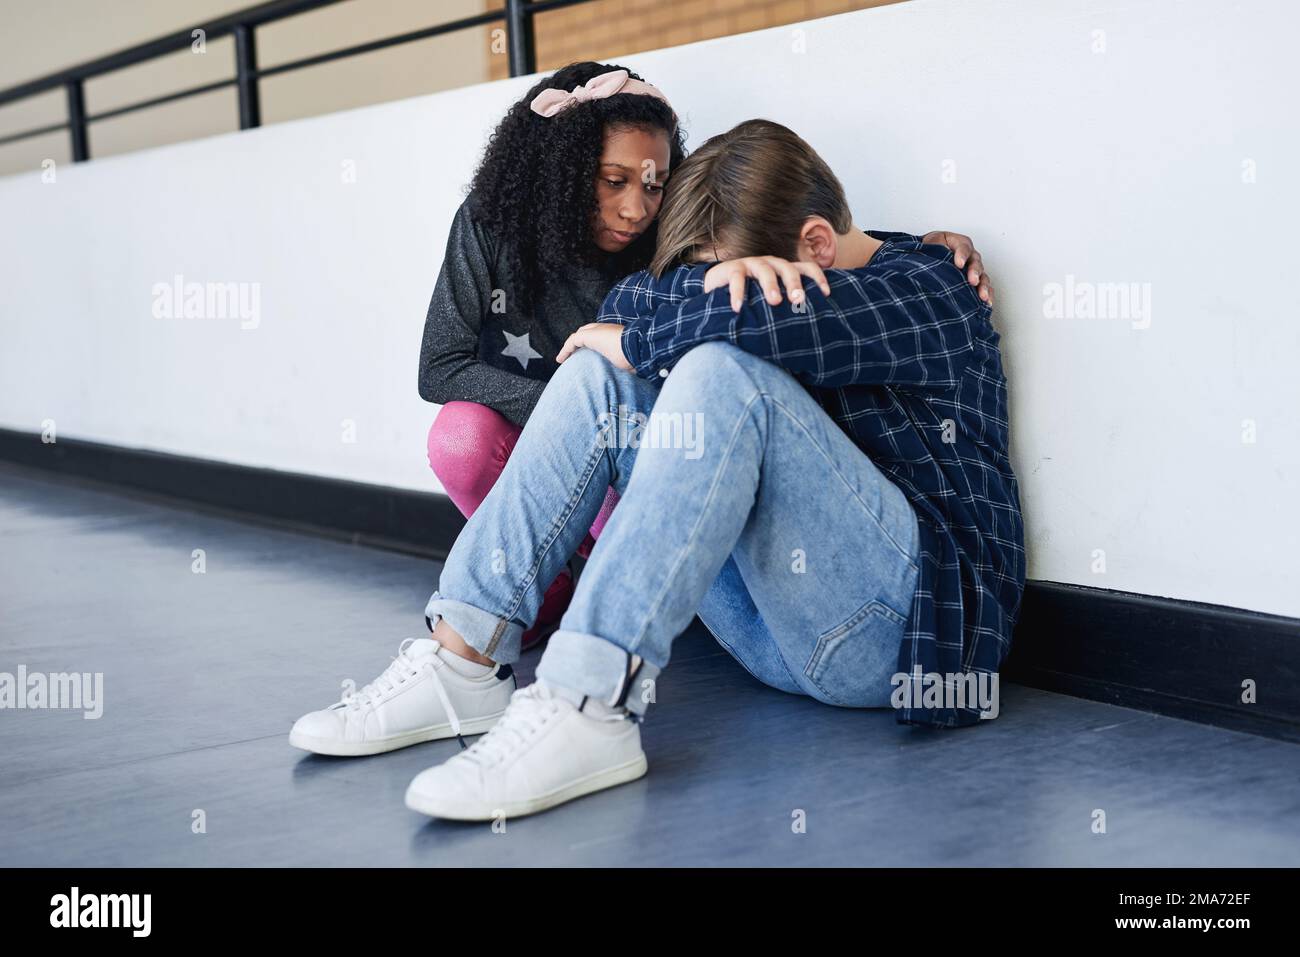 Are you okay. Full length shot of an unrecognizable boy sitting in the school hallway and feeling depressed while a classmate comforts him. Stock Photo